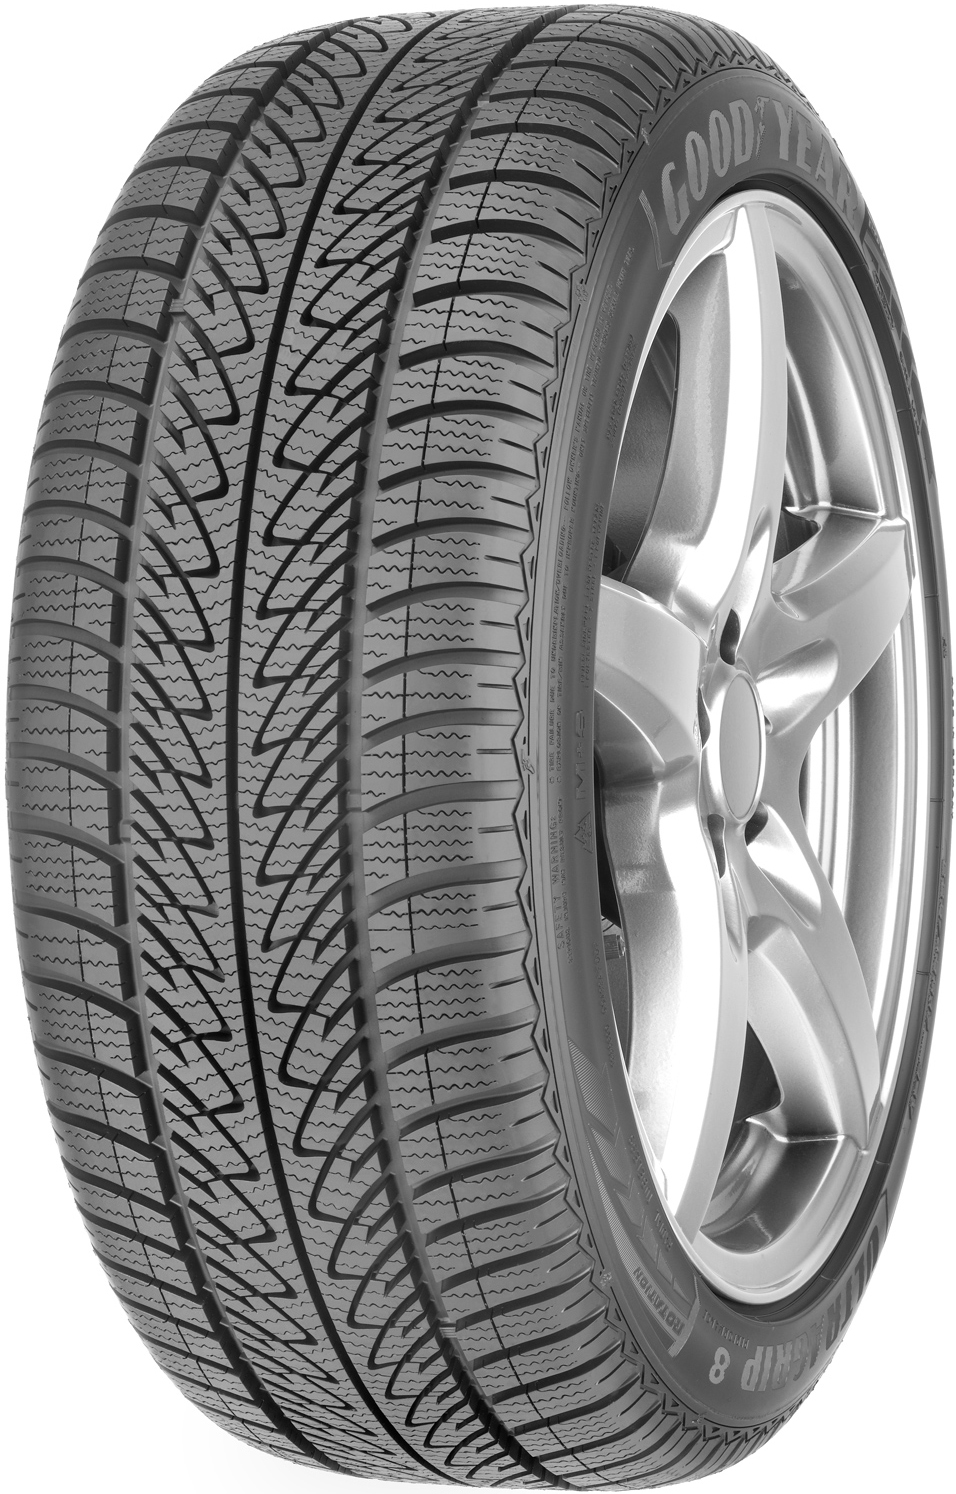 Anvelope auto GOODYEAR ULTRA GRIP 8 PERFORMANCE MS XL FP 205/45 R17 88V